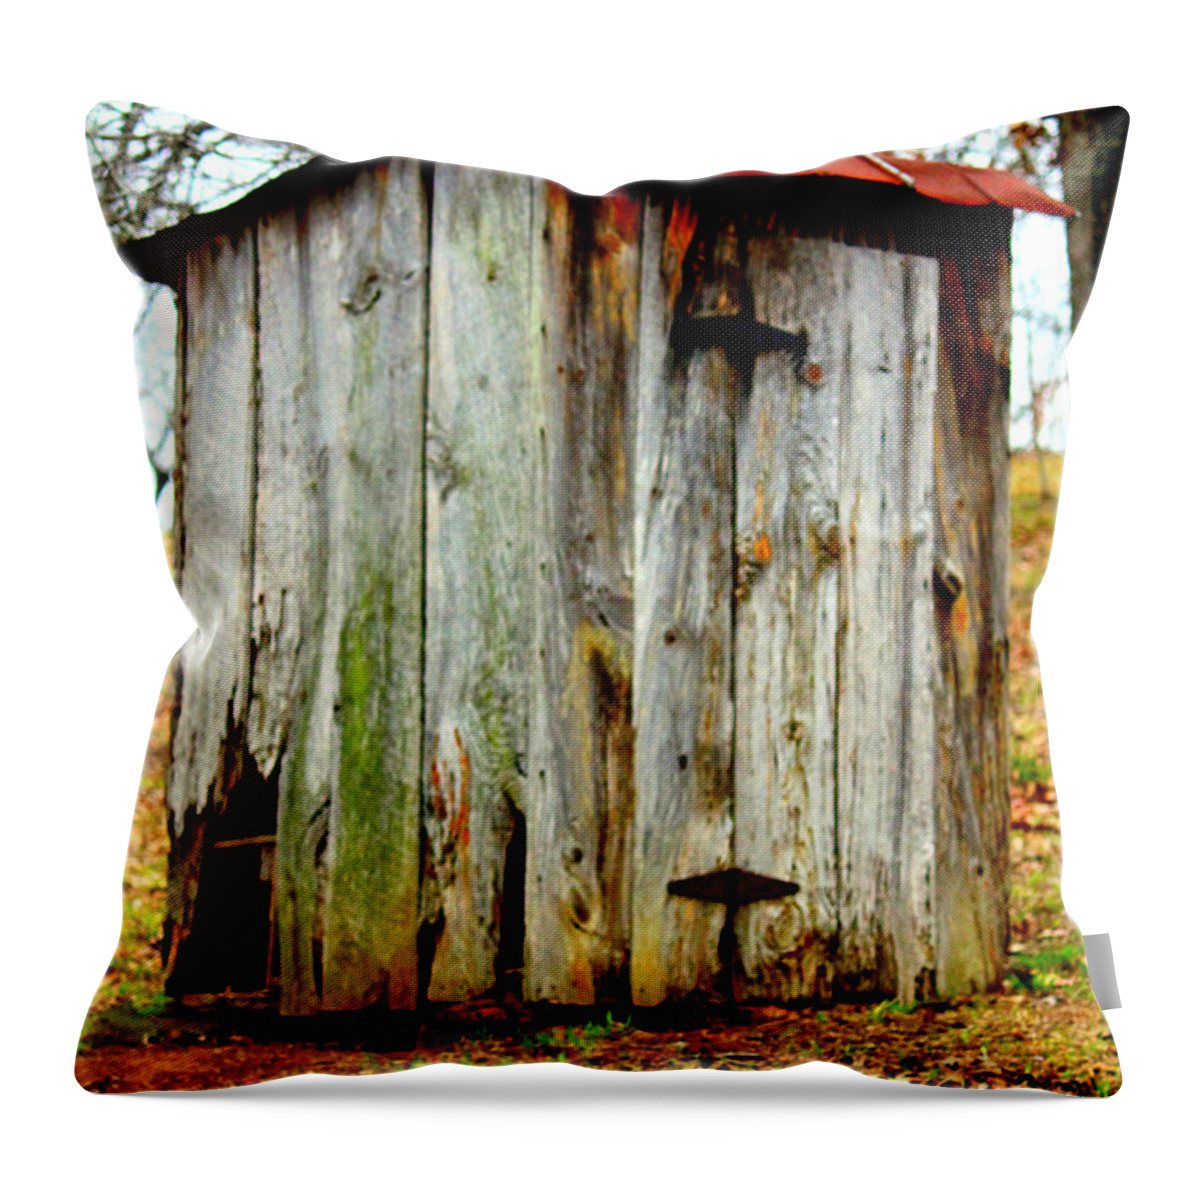 Old Outhouse Throw Pillow featuring the photograph Yer Old Outhouse by Kathy White